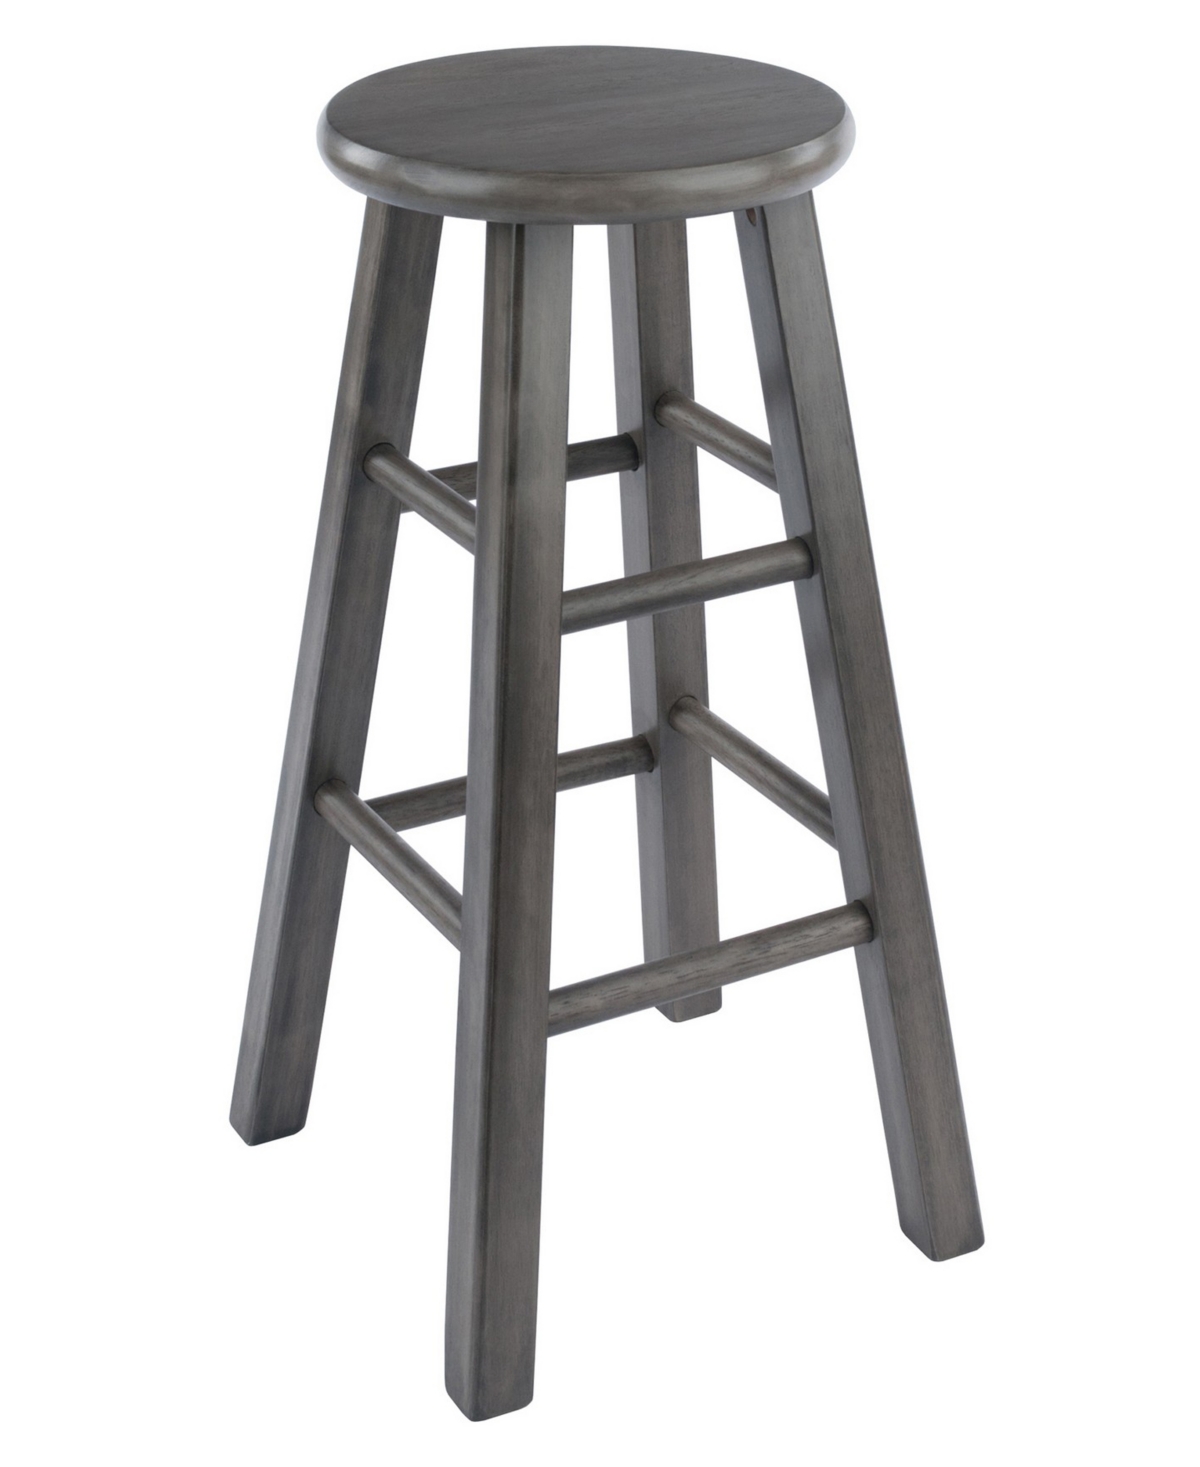 Winsome Ivy 24.2" Wood Square Leg Counter Stool In Rustic Gray